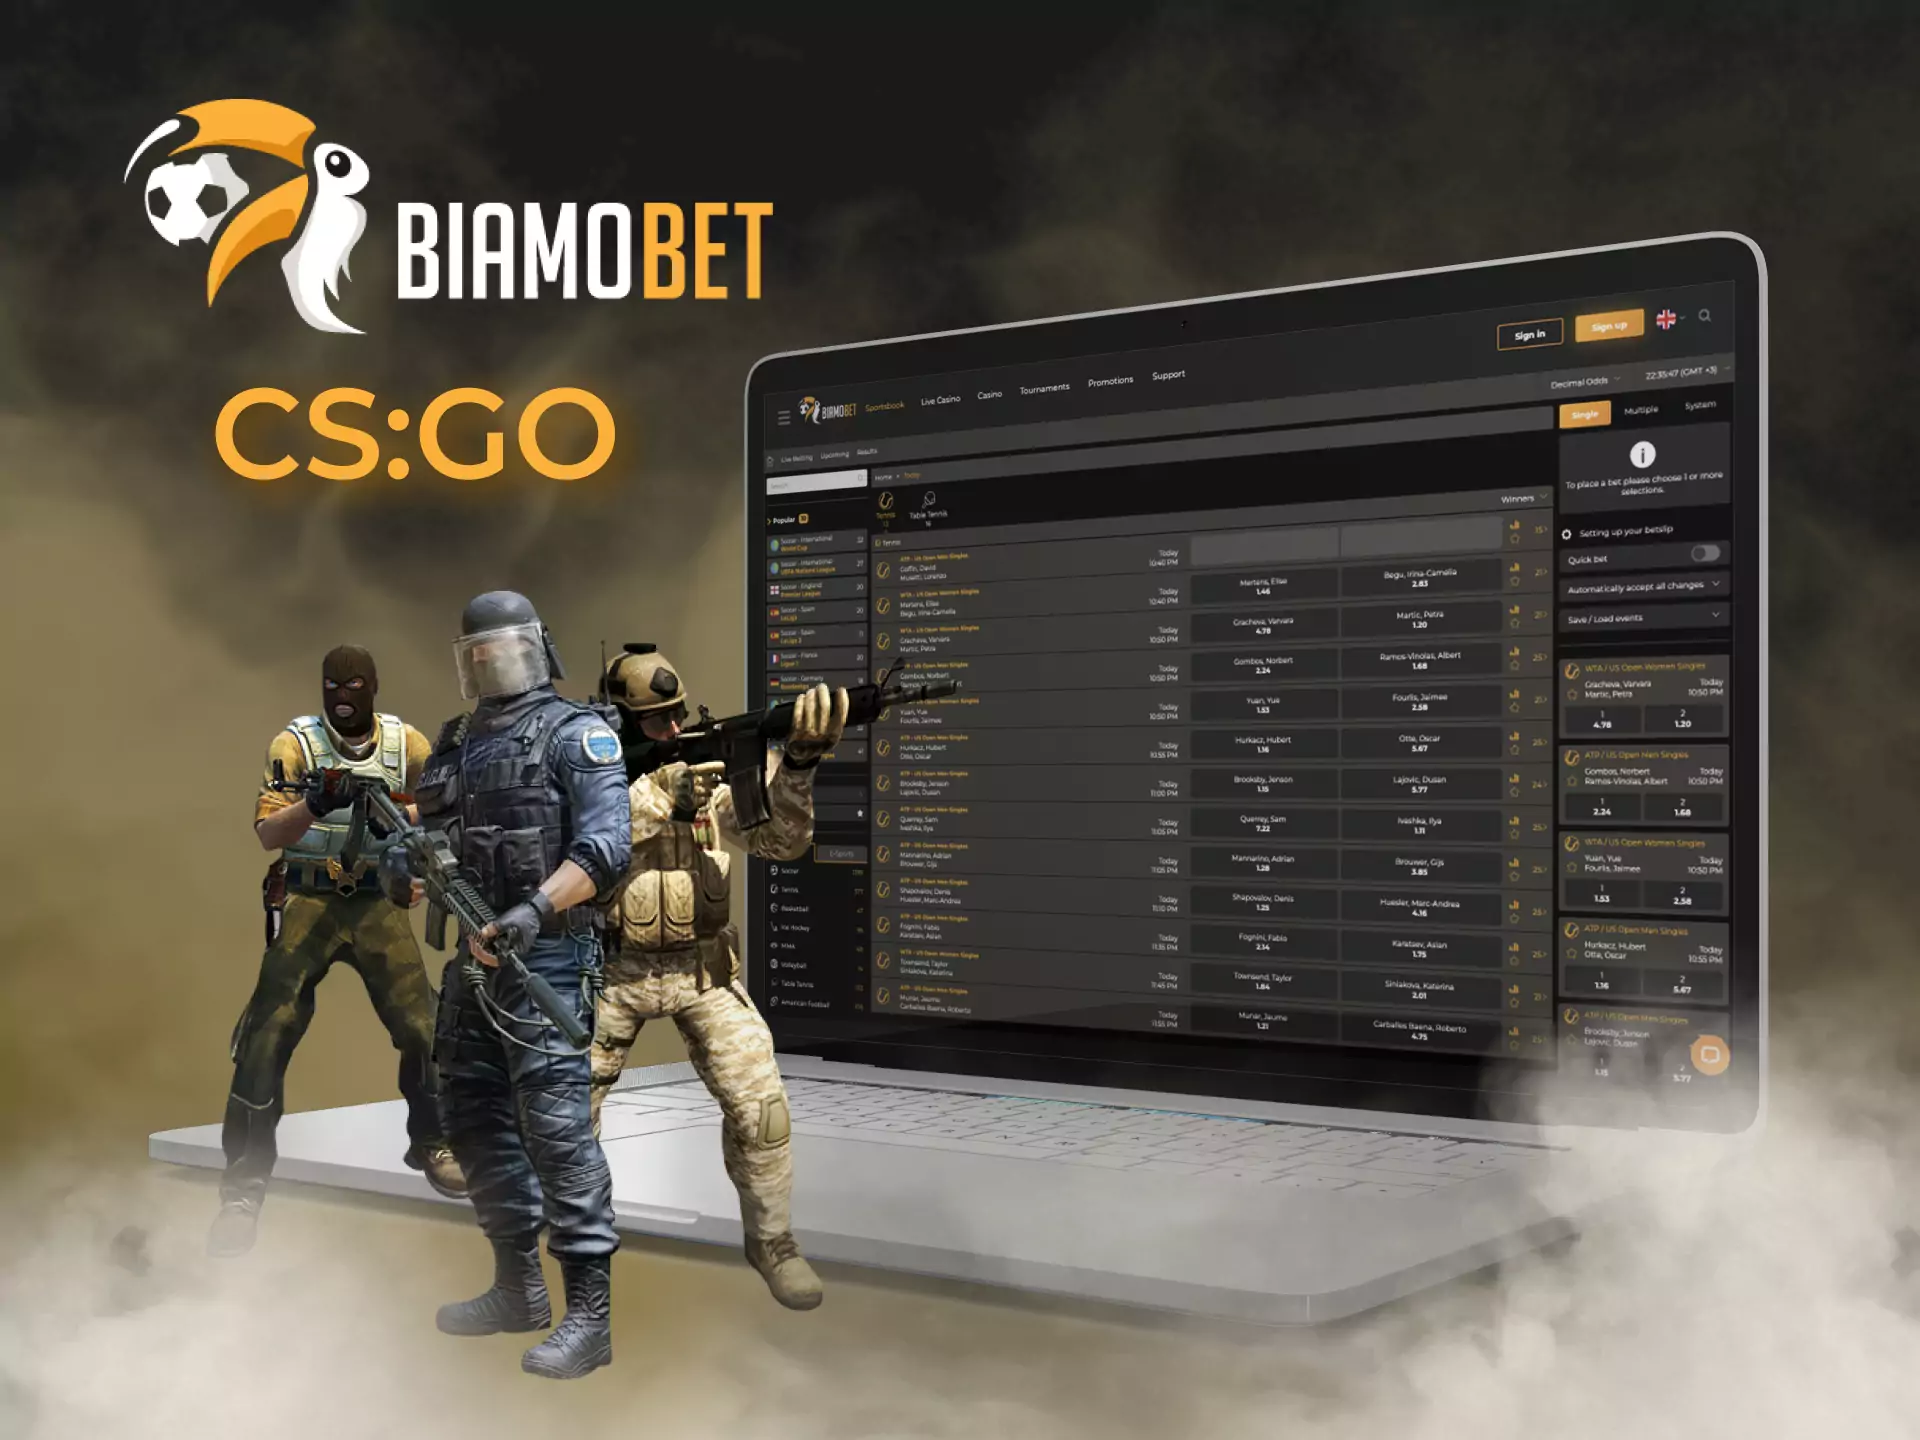 In the Biamobet esportsbook you can place a bet on CS:GO matches.